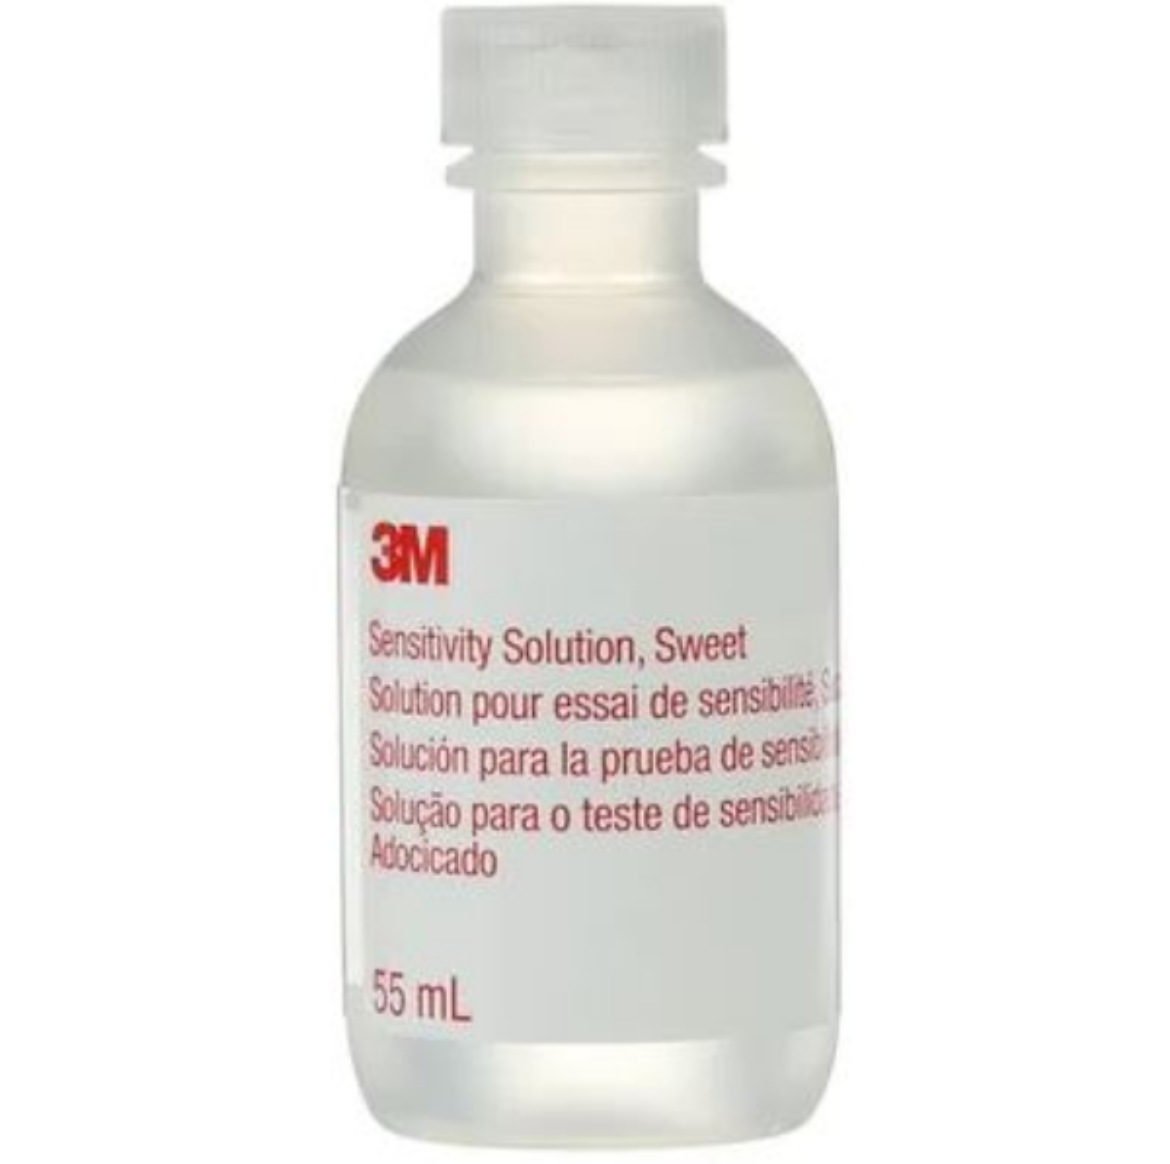 Picture of FT-11 SENSITIVITY SOLUTION SWEET (SACCHARIN), 55ML